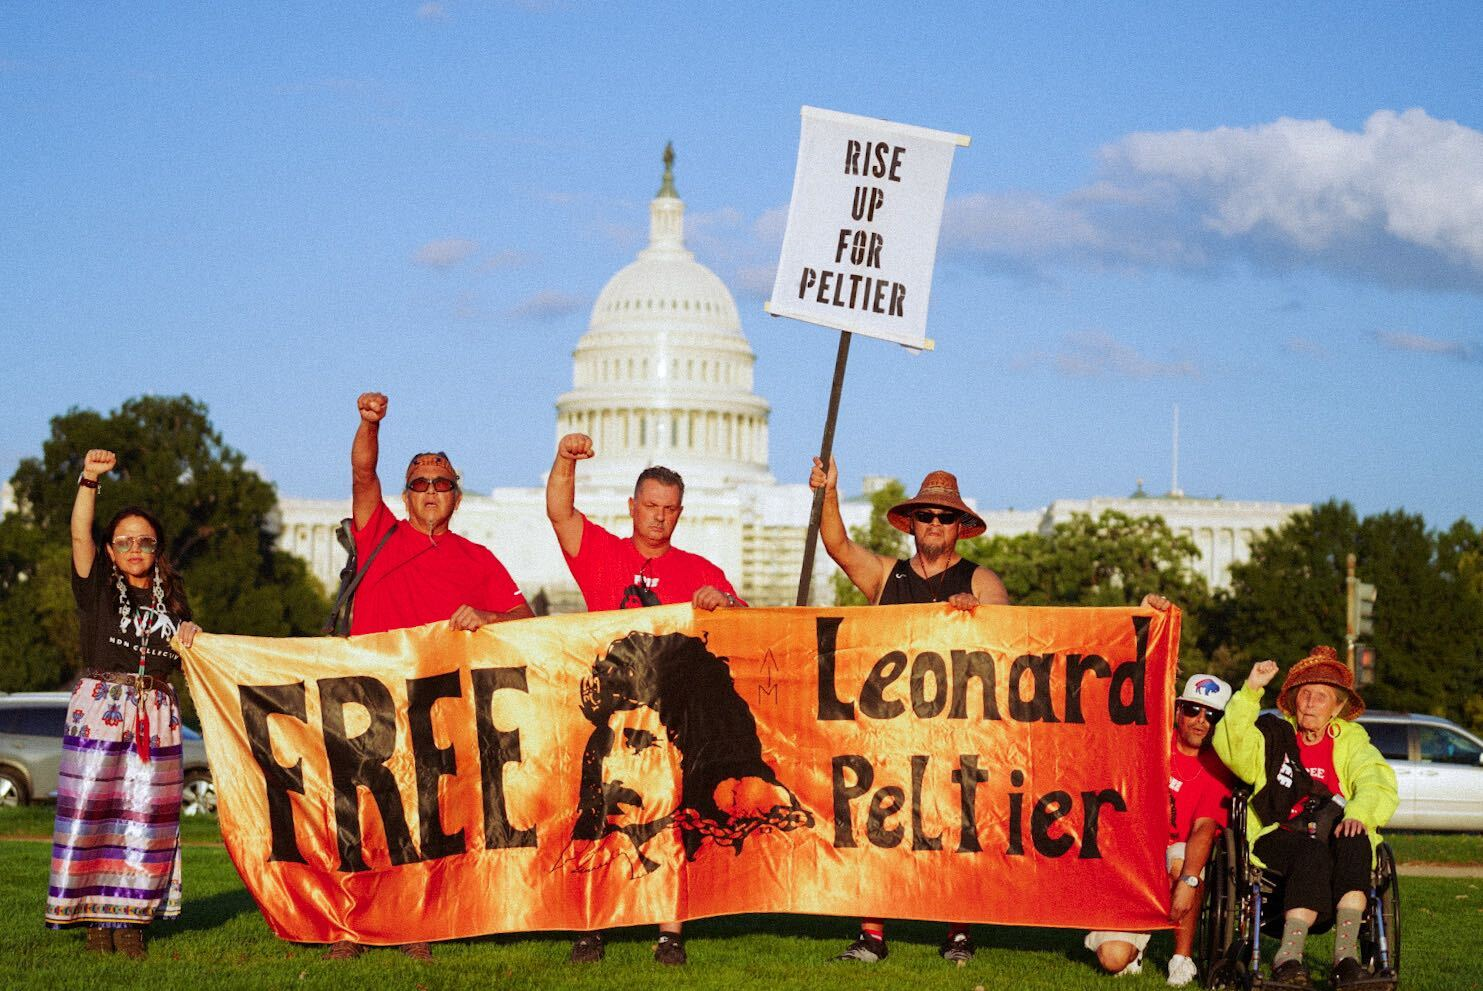 Leading up to the Free Leonard Peltier Rally 79th Birthday Action on September 12th, Indigenous Peoples from across Turtle Island joined together to voice the demand to #FreeLeonardPeltier. Photo: Willi White for NDN Collective.